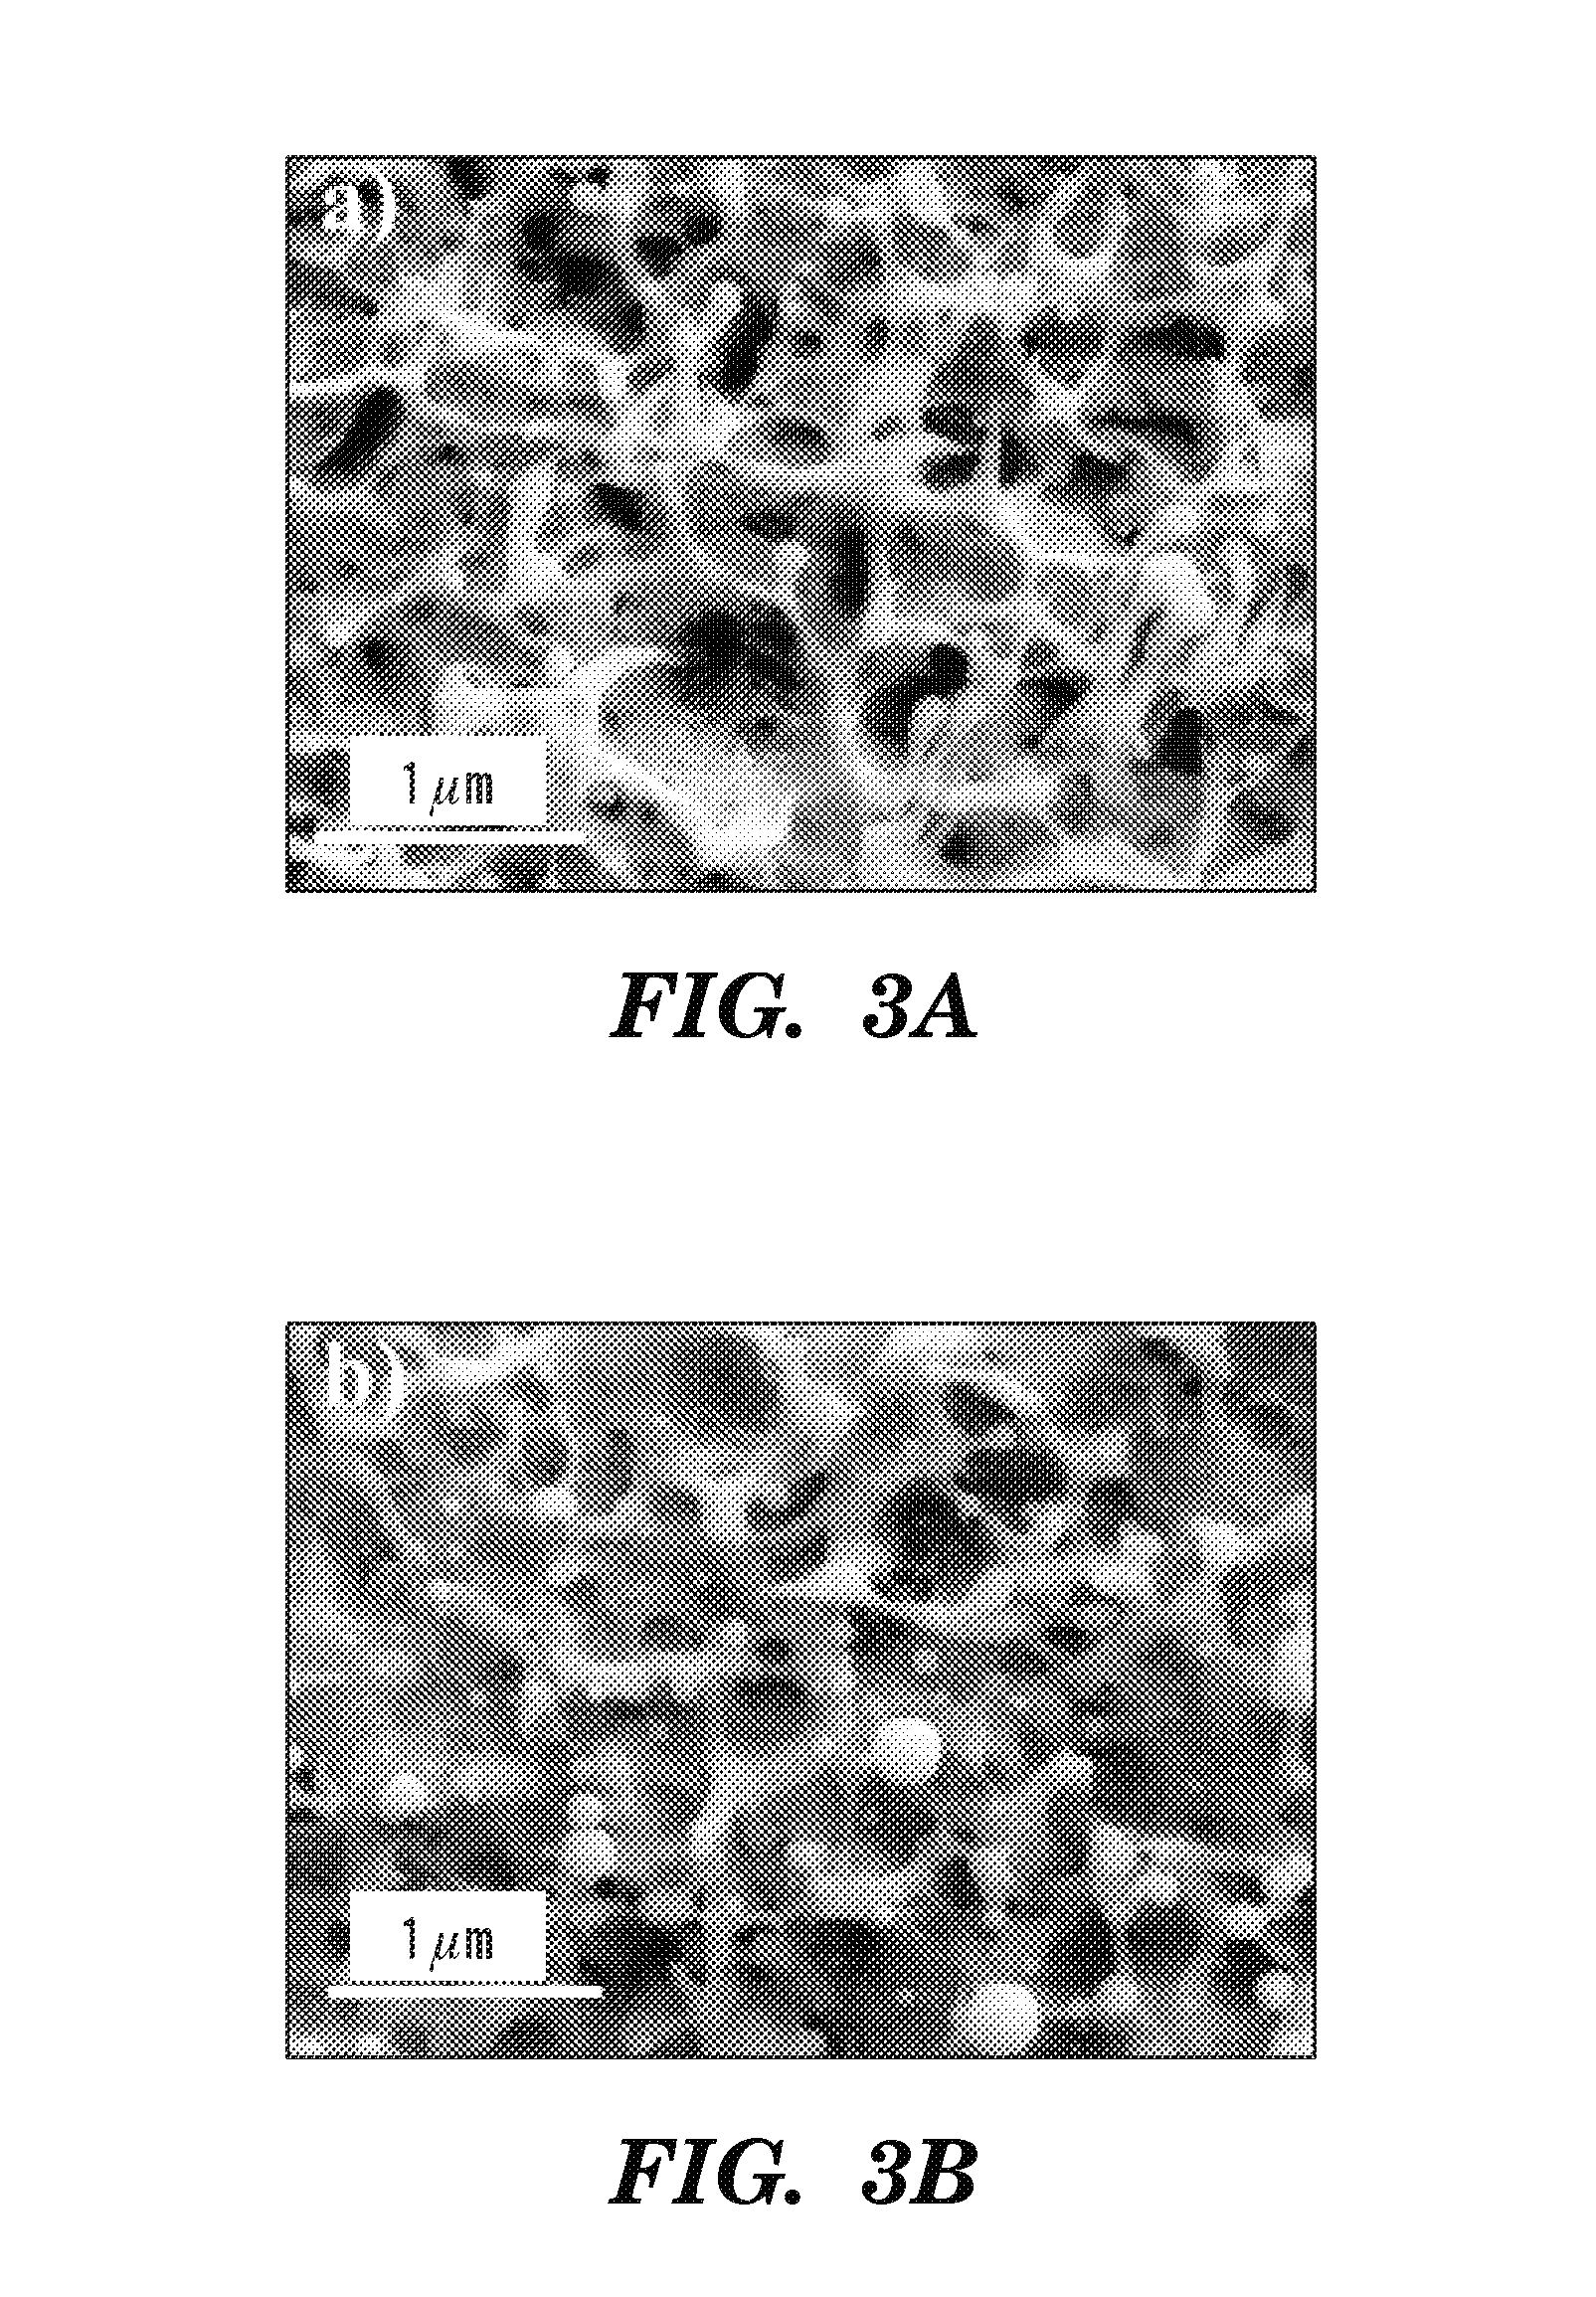 Super-hydrophobic surfaces and methods for producing super-hydrophobic surfaces